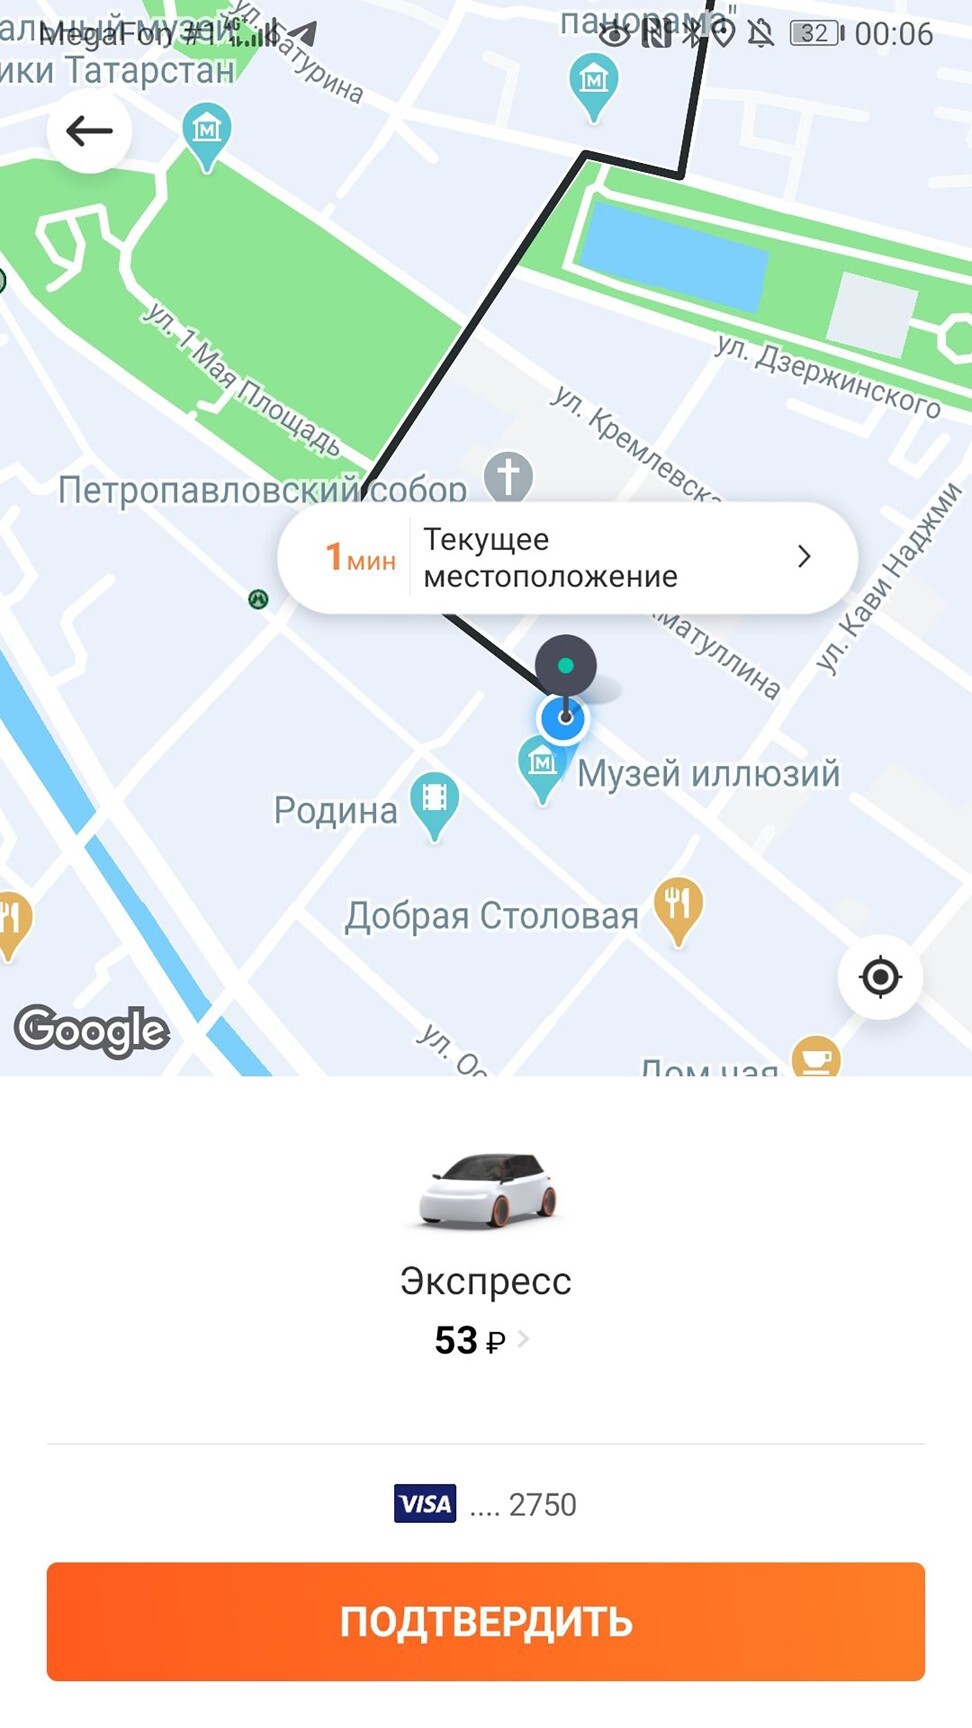 A screenshot of Didi Chuxing’s app in Russia, where its initial service coverage is in Kazan, capital of the Republic of Tatarstan. Photo: Handout